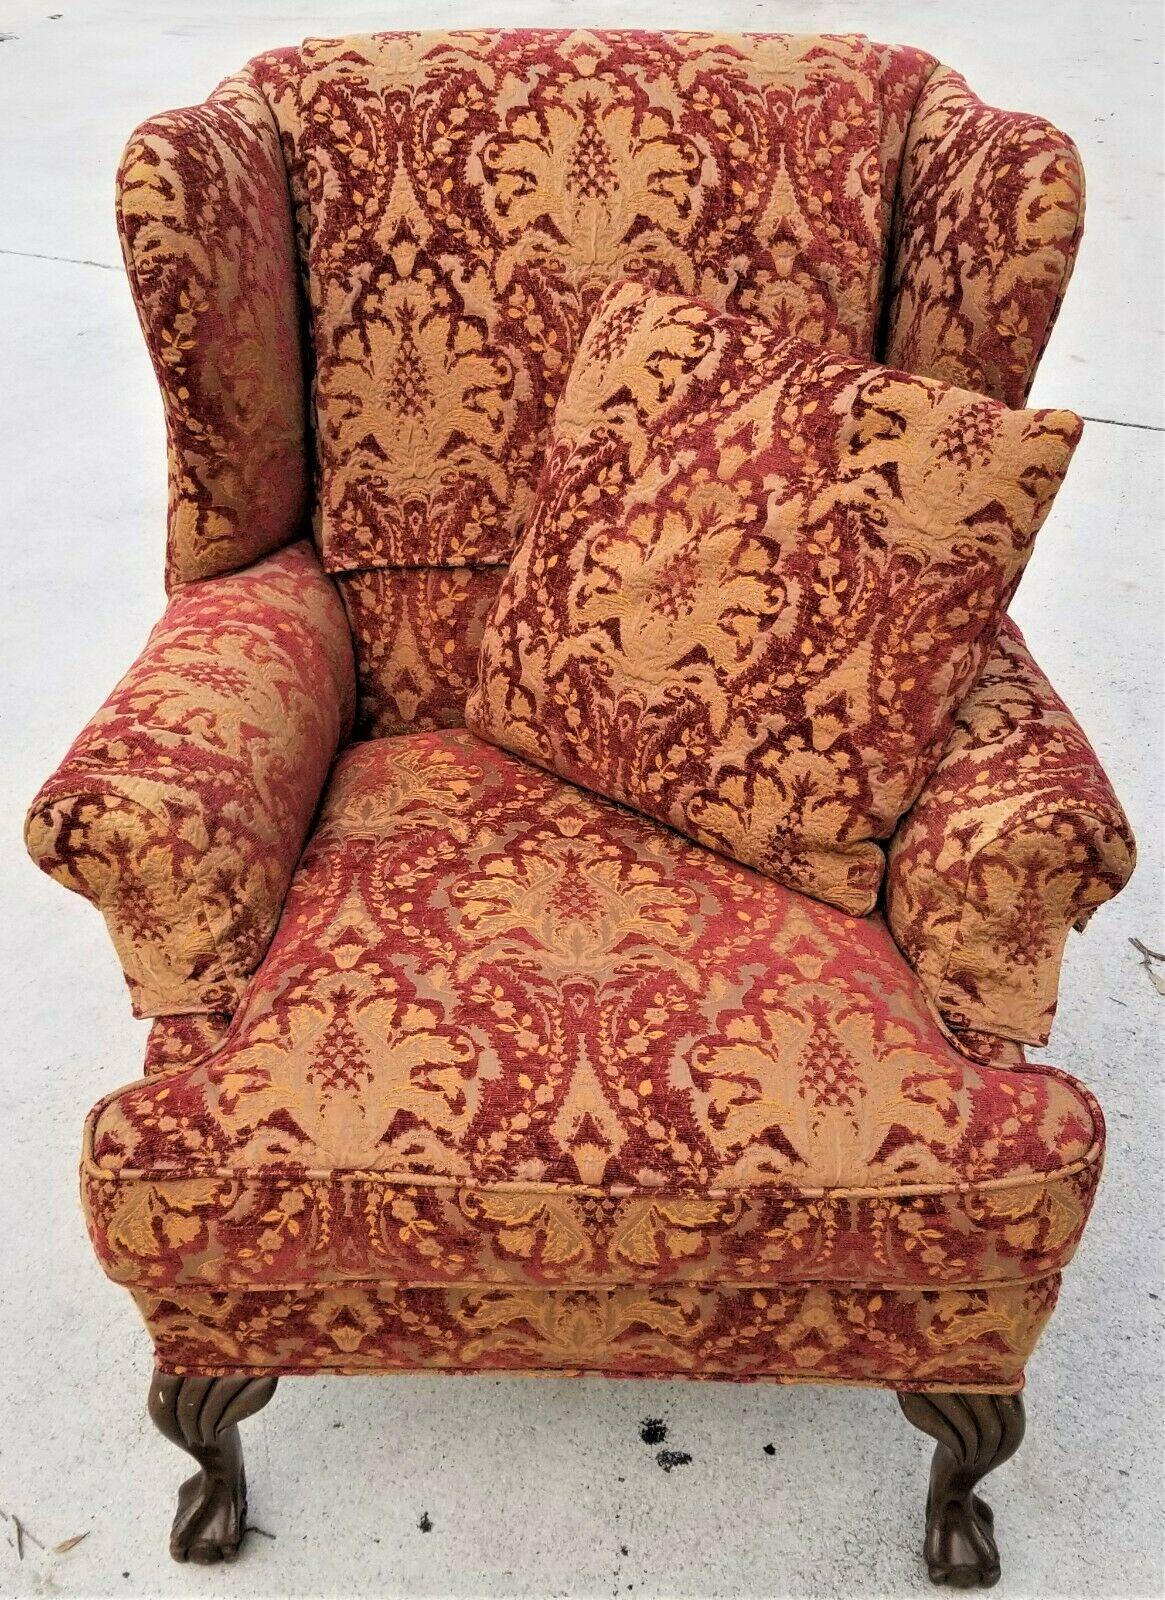 For FULL item description click on CONTINUE READING at the bottom of this page.

Offering One Of Our Recent Palm Beach Estate Fine Furniture Acquisitions Of A
Chippendale Wingback Burnout Velvet Damask Mahogany Ball & Claw Down